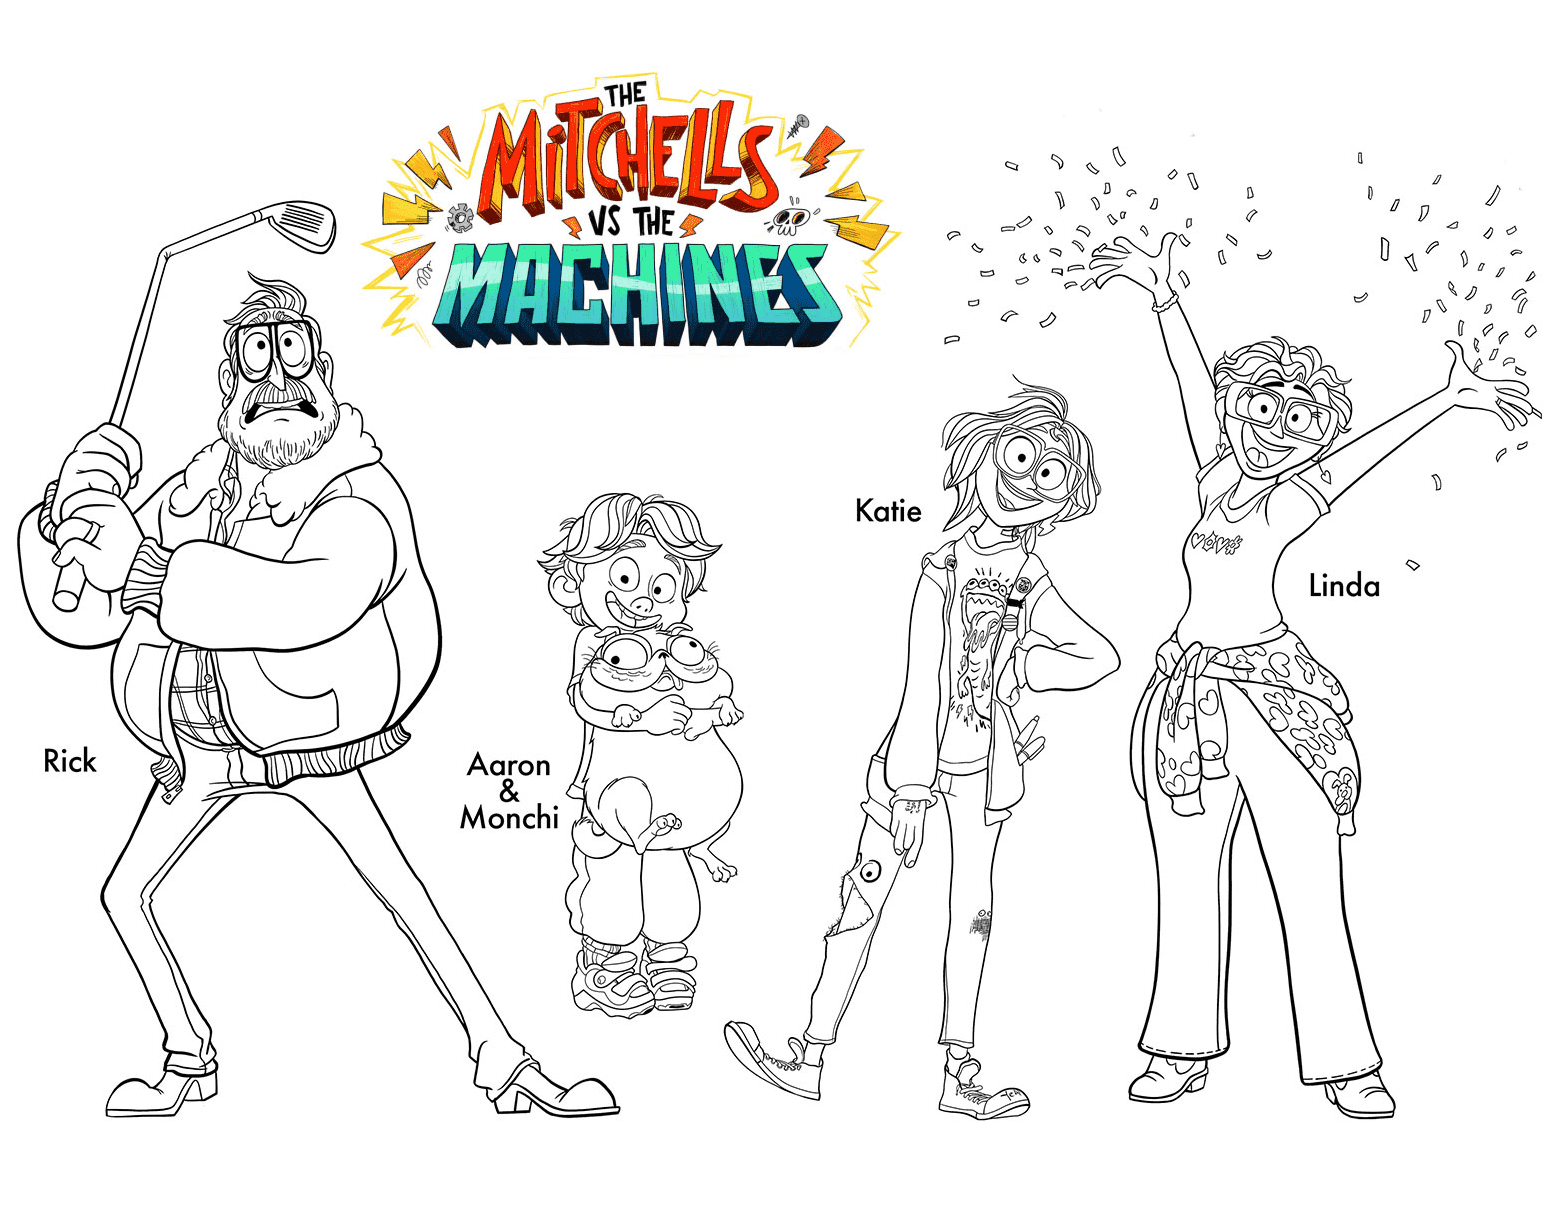 The Mitchells vs the Machines Coloring Page